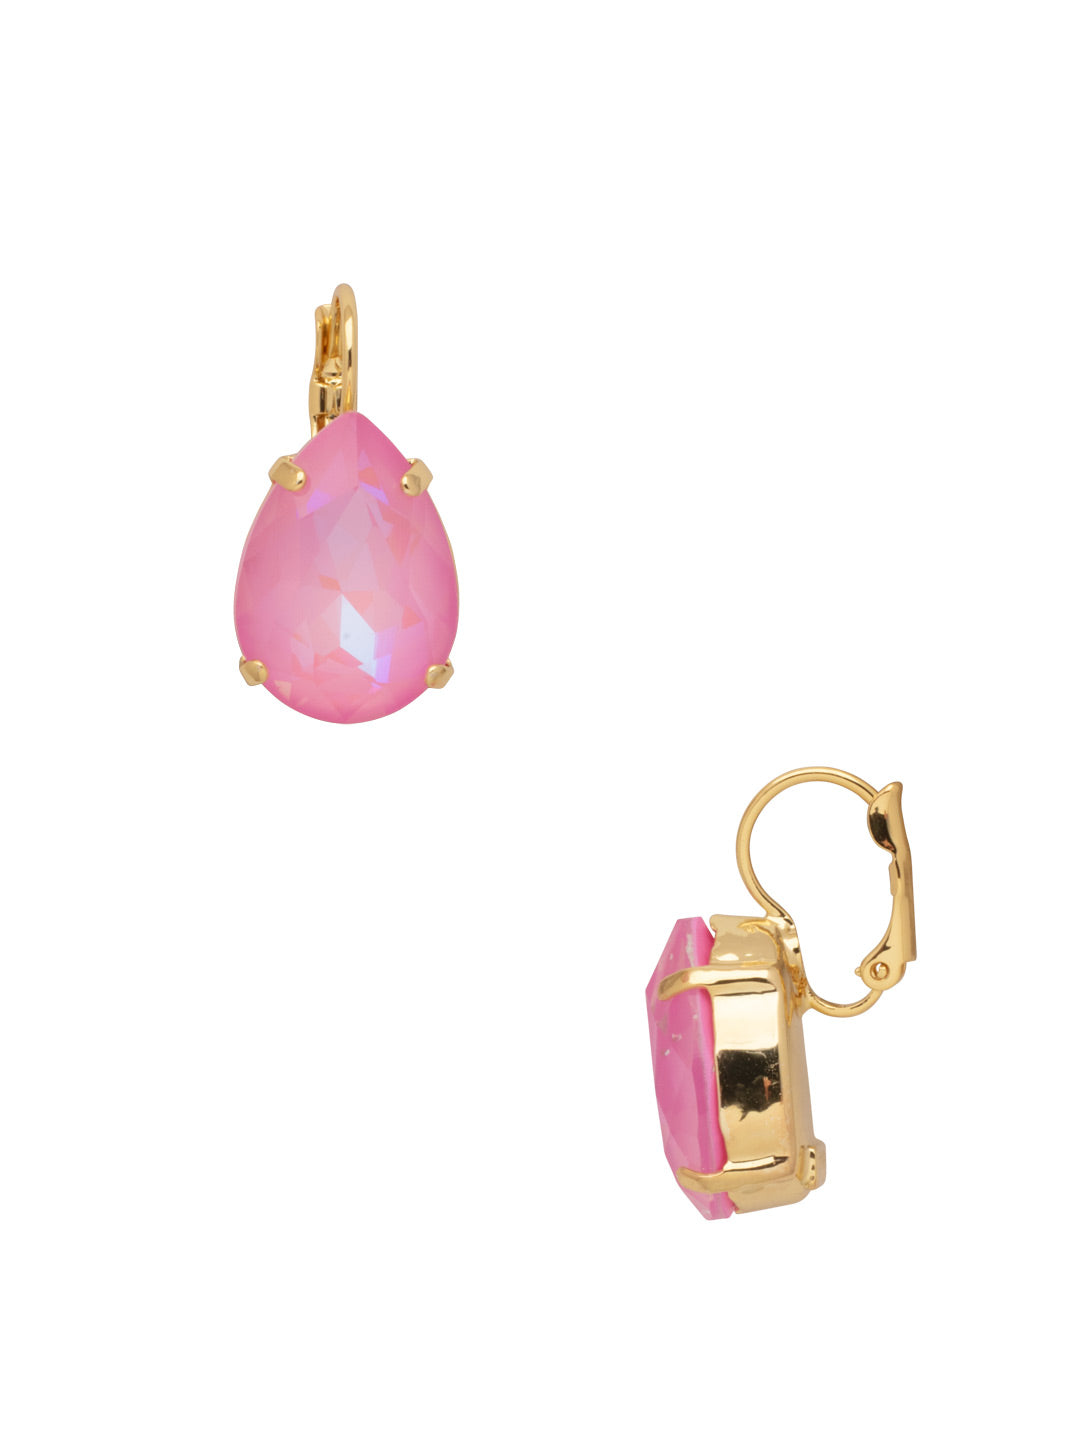 Eileen Dangle Earrings - EFF101BGLRD - <p>The Eileen Dangle Earrings feature a single pear cut candy gem crystal dangling from a lever back French wire. From Sorrelli's Light Rose Delite collection in our Bright Gold-tone finish.</p>